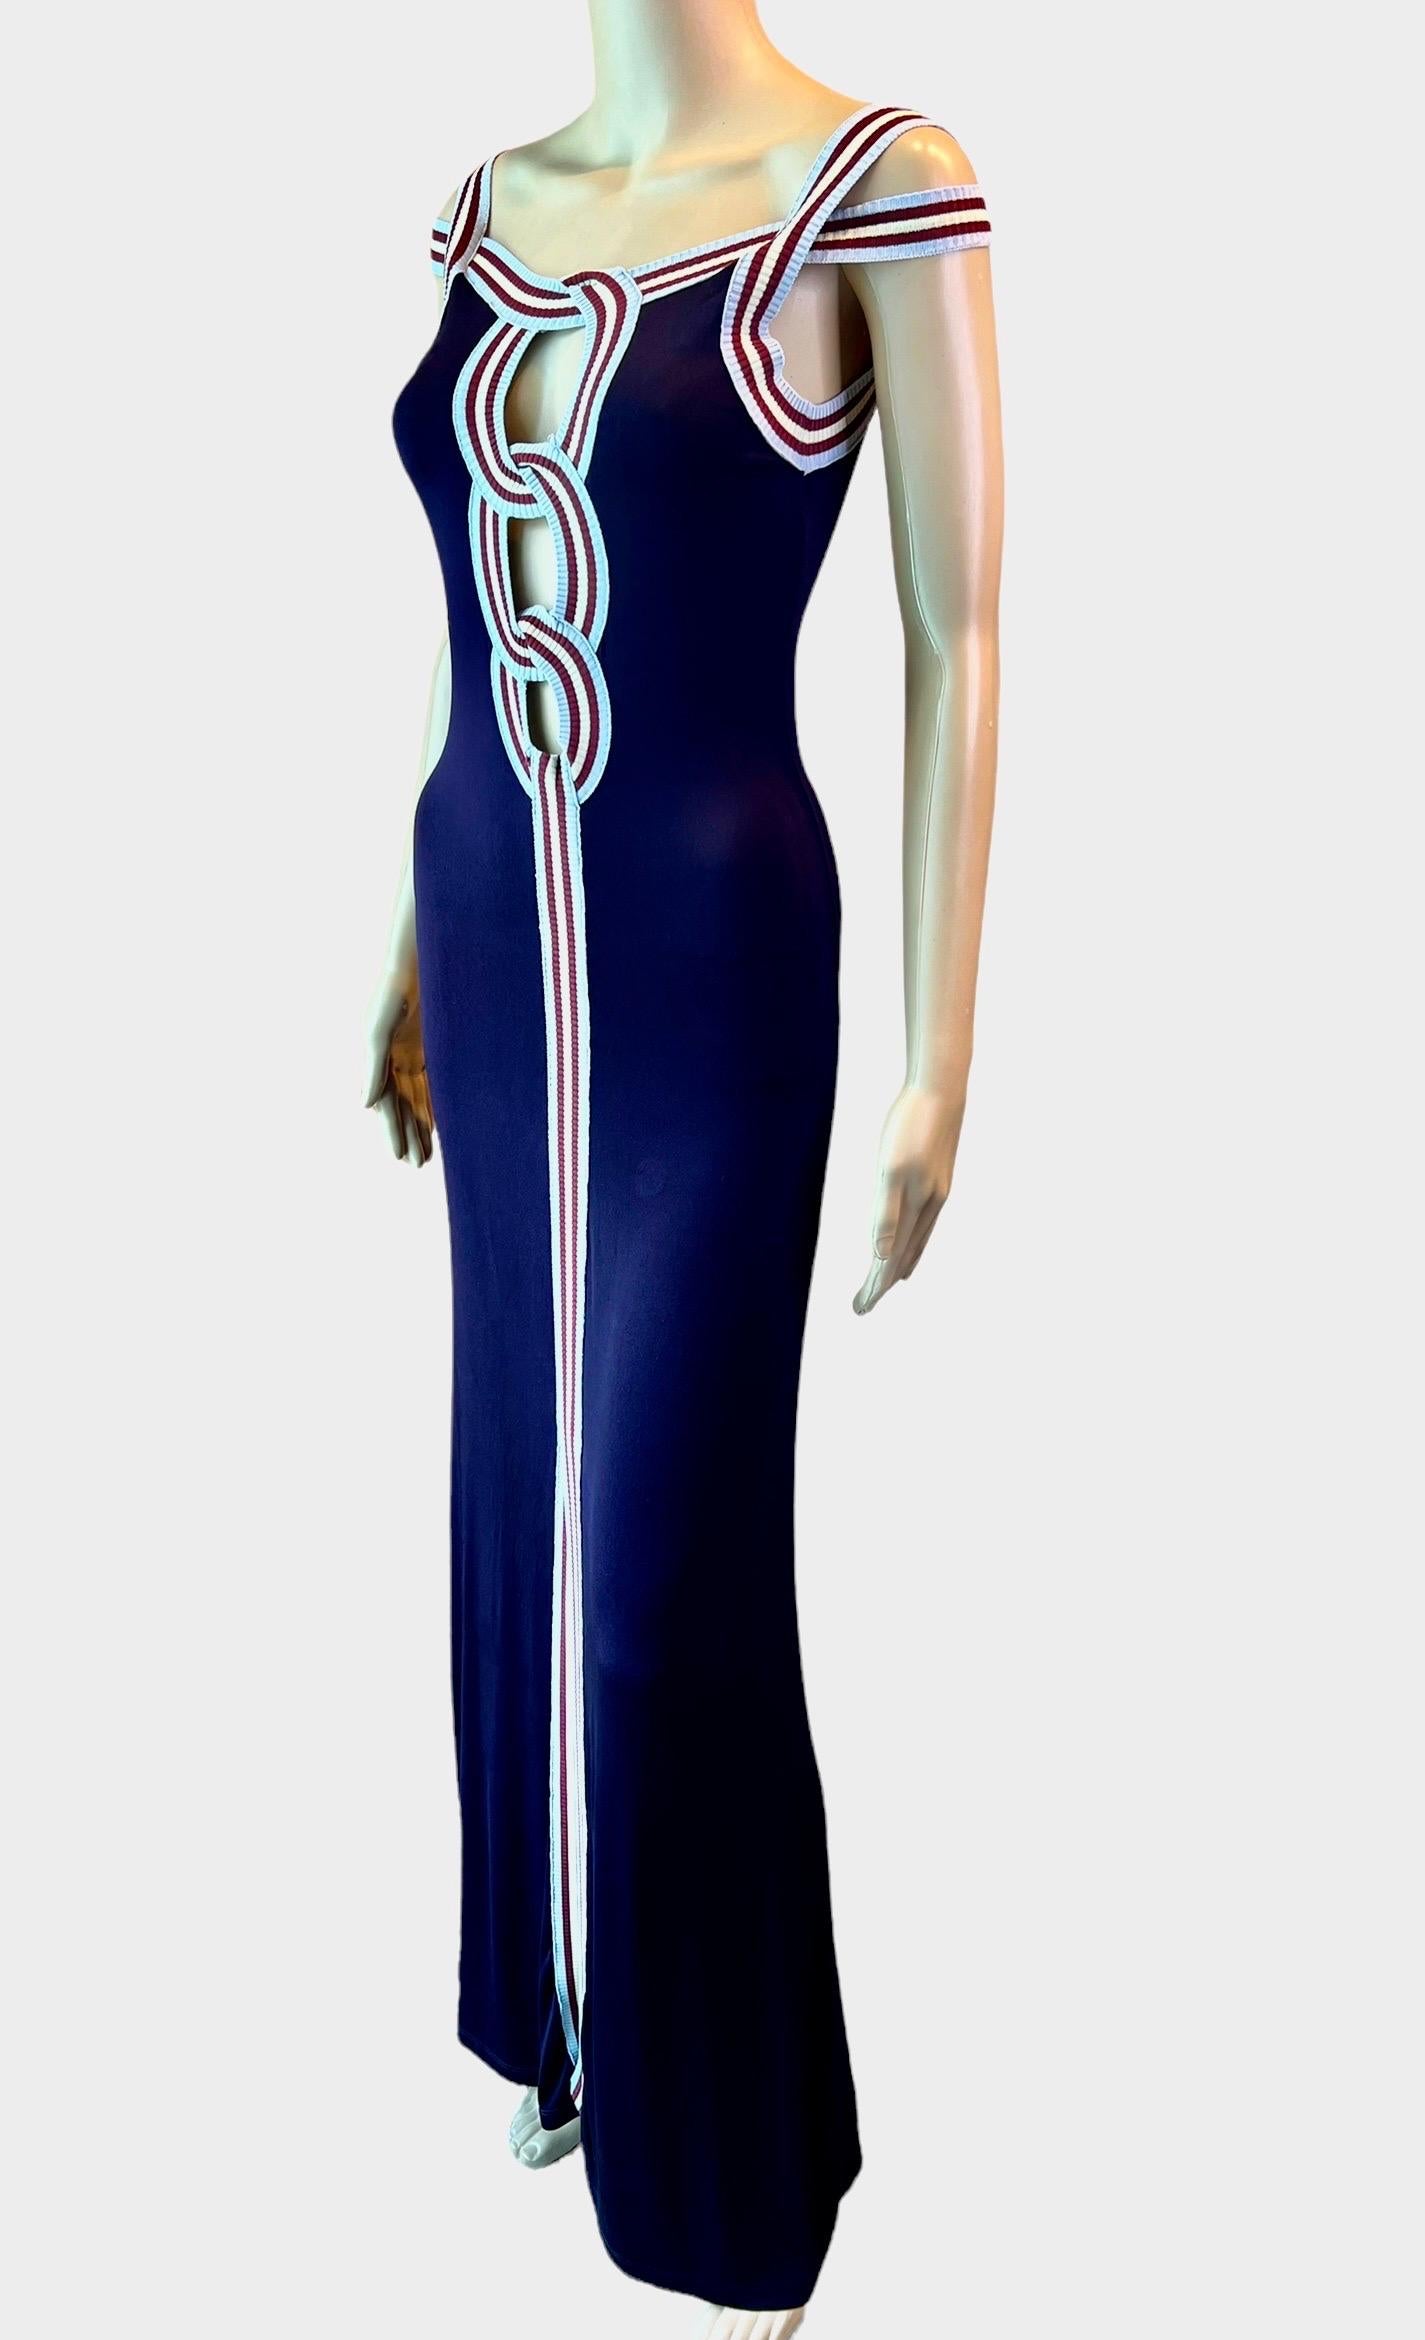 Jean Paul Gaultier S/S 2007 Cutout Bodycon Maxi Dress In Good Condition For Sale In Naples, FL